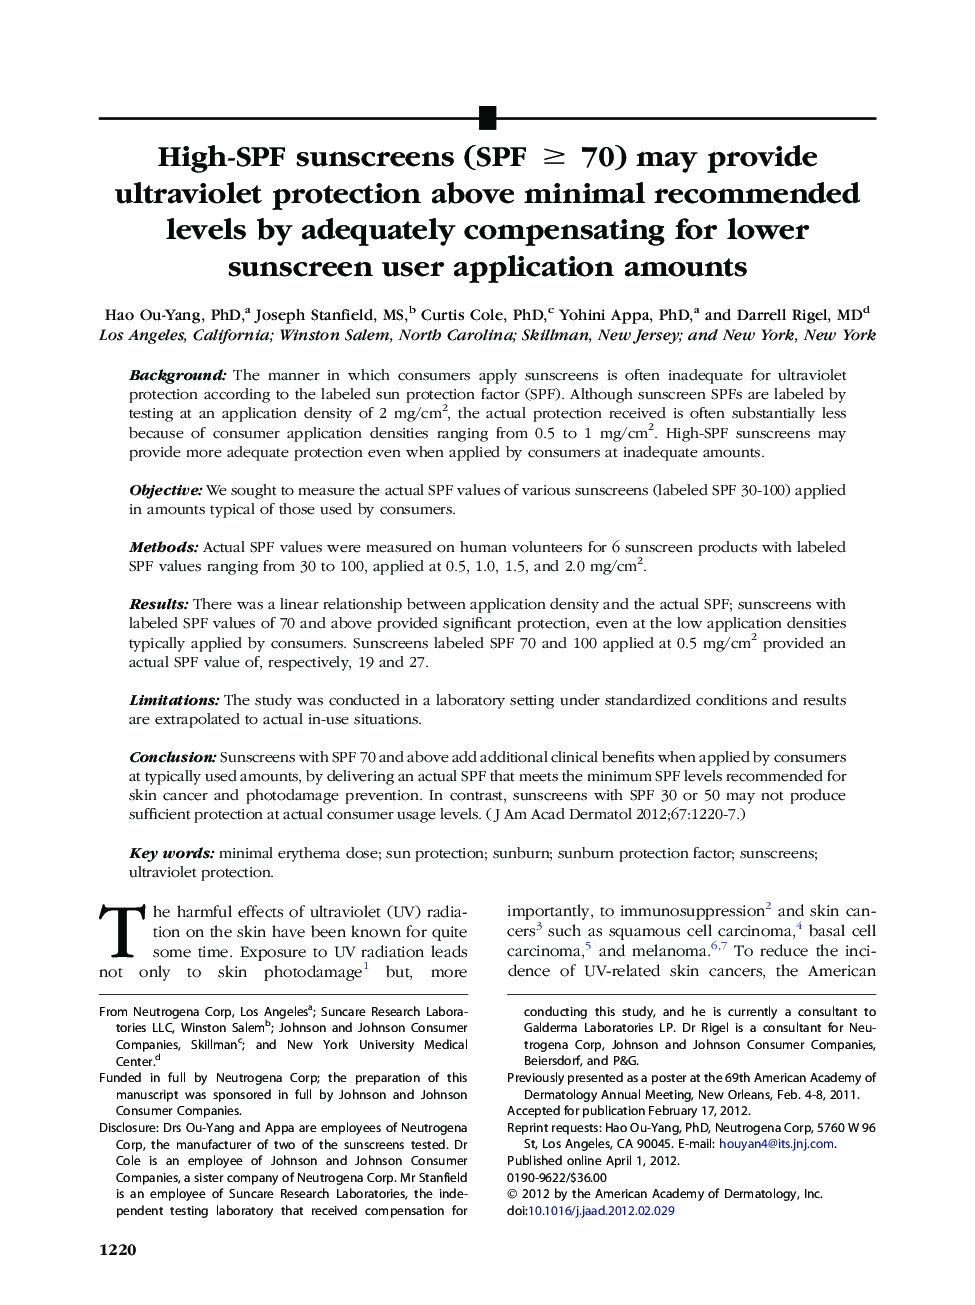 High-SPF sunscreens (SPF ≥ 70) may provide ultraviolet protection above minimal recommended levels by adequately compensating for lower sunscreen user application amounts 